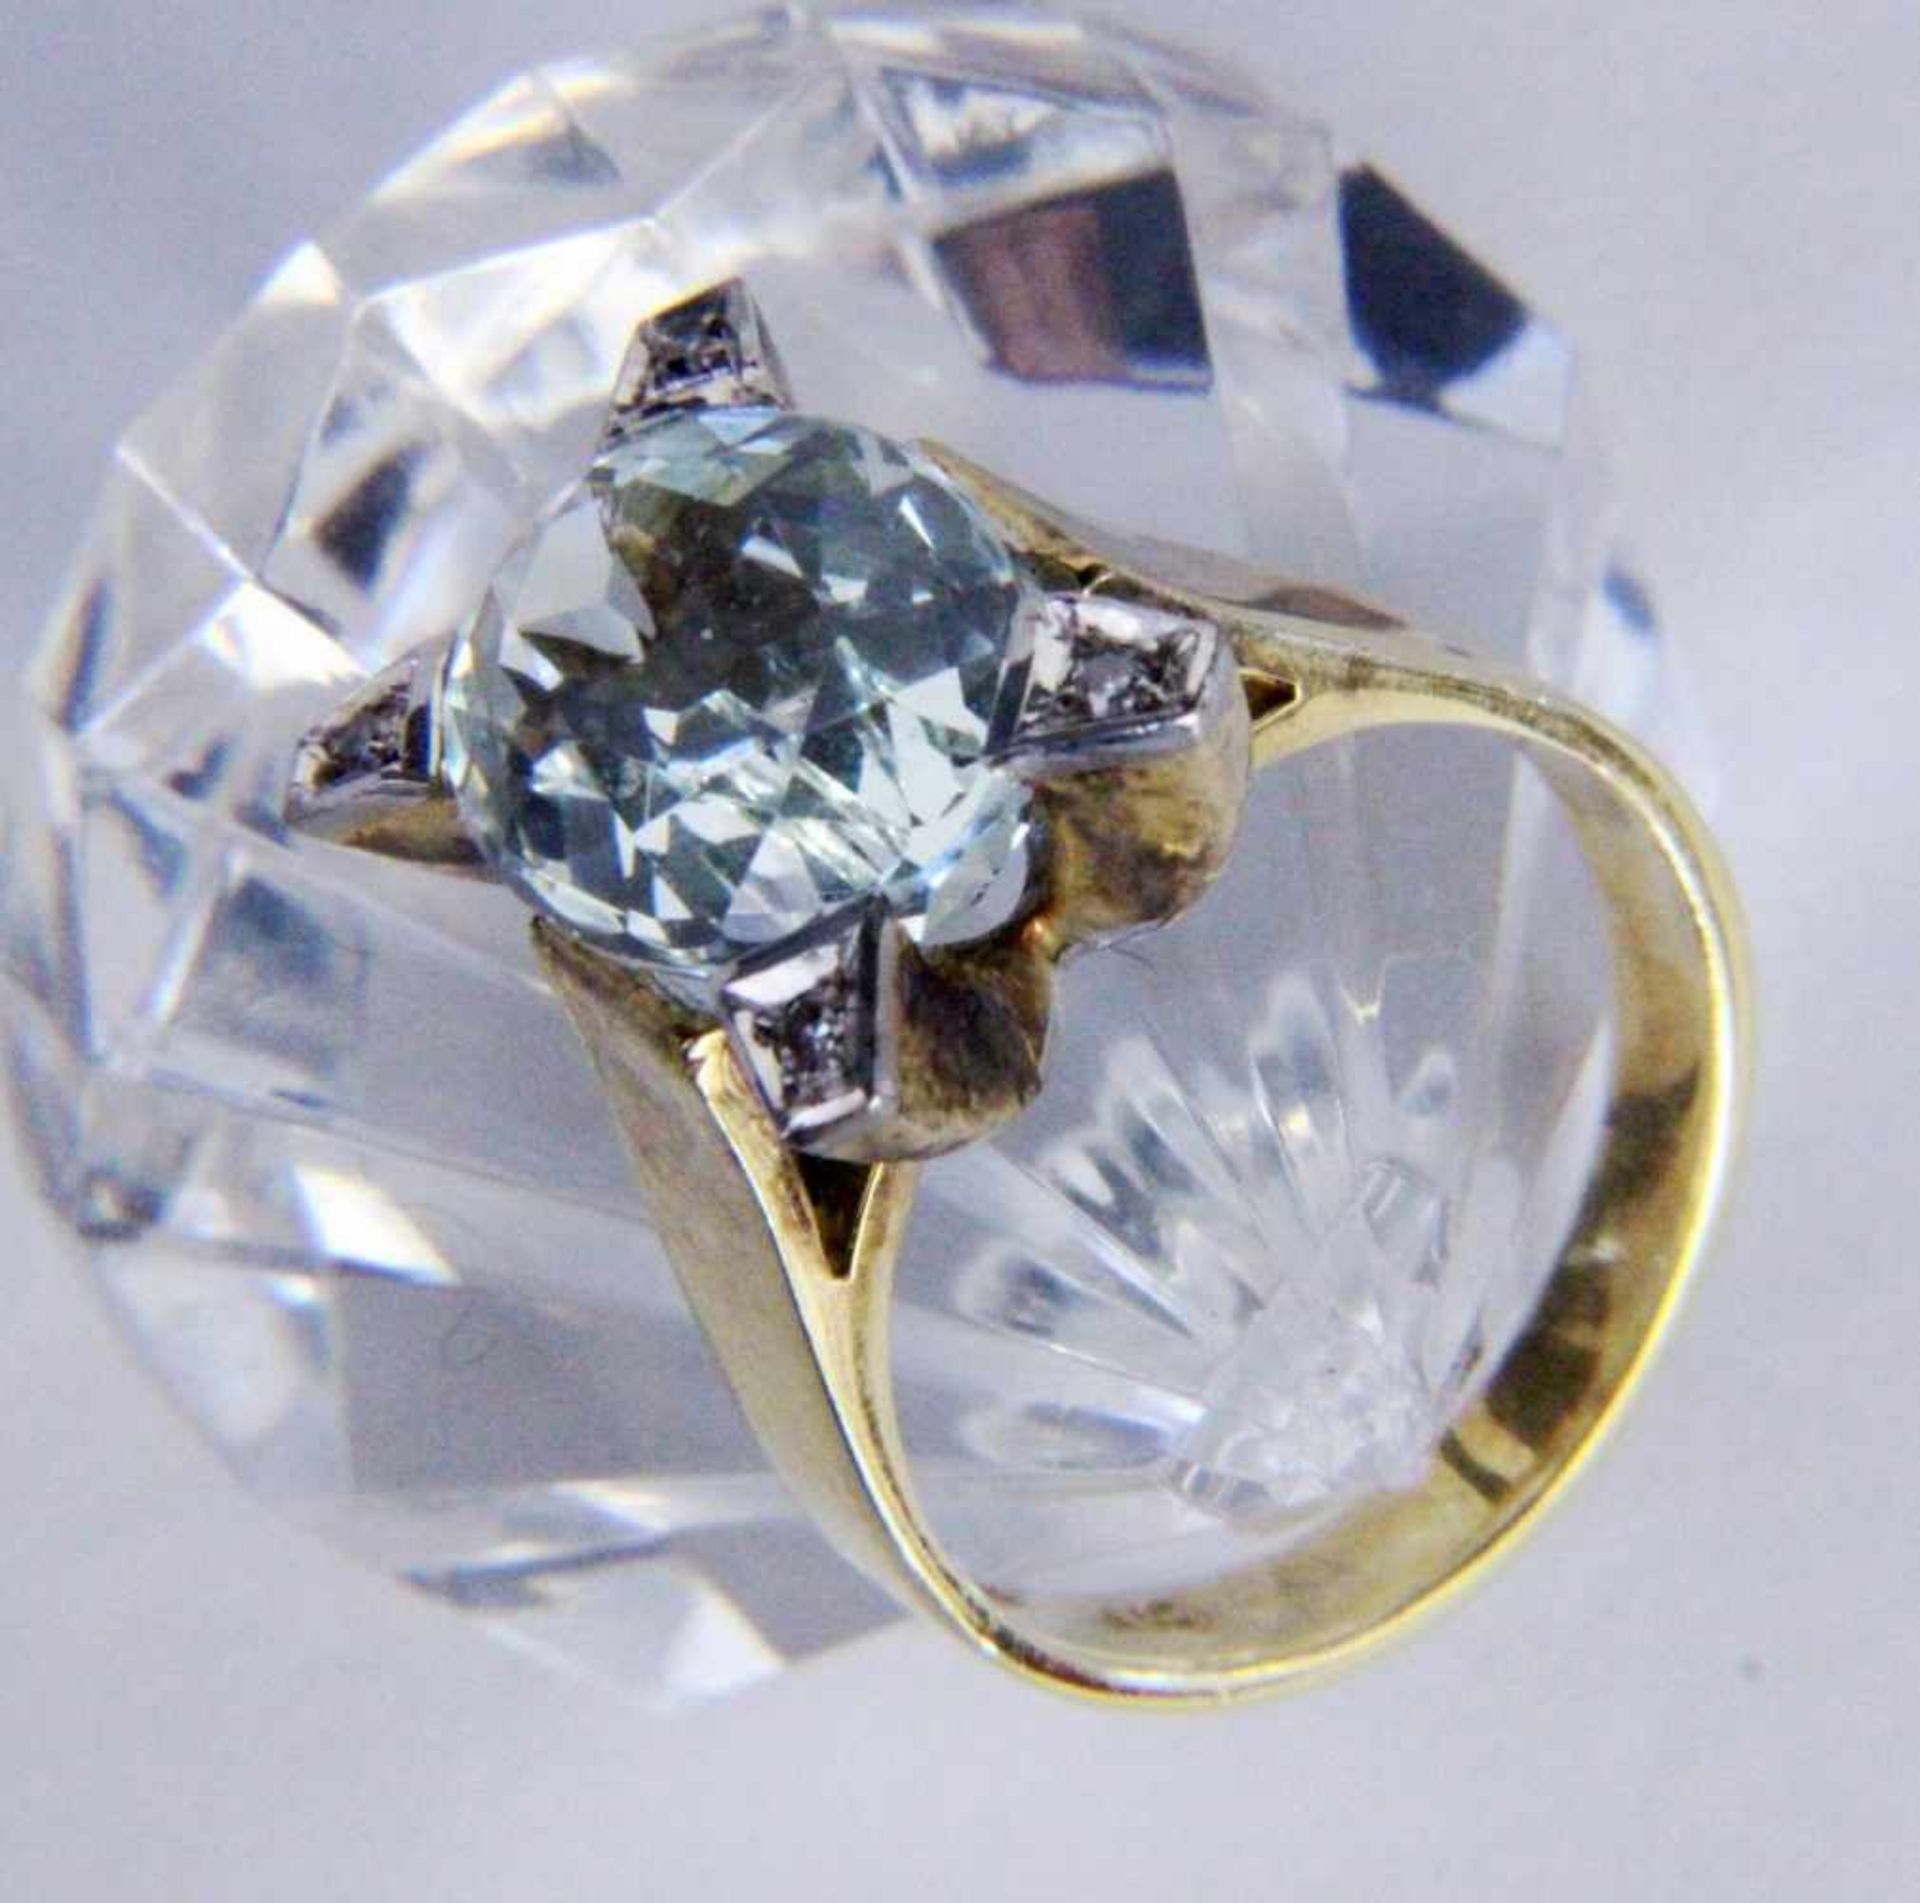 A LADIES' RING 585/000 yellow gold with fine aquamarine and 4 brilliant cut diamonds. Ringsize 55,